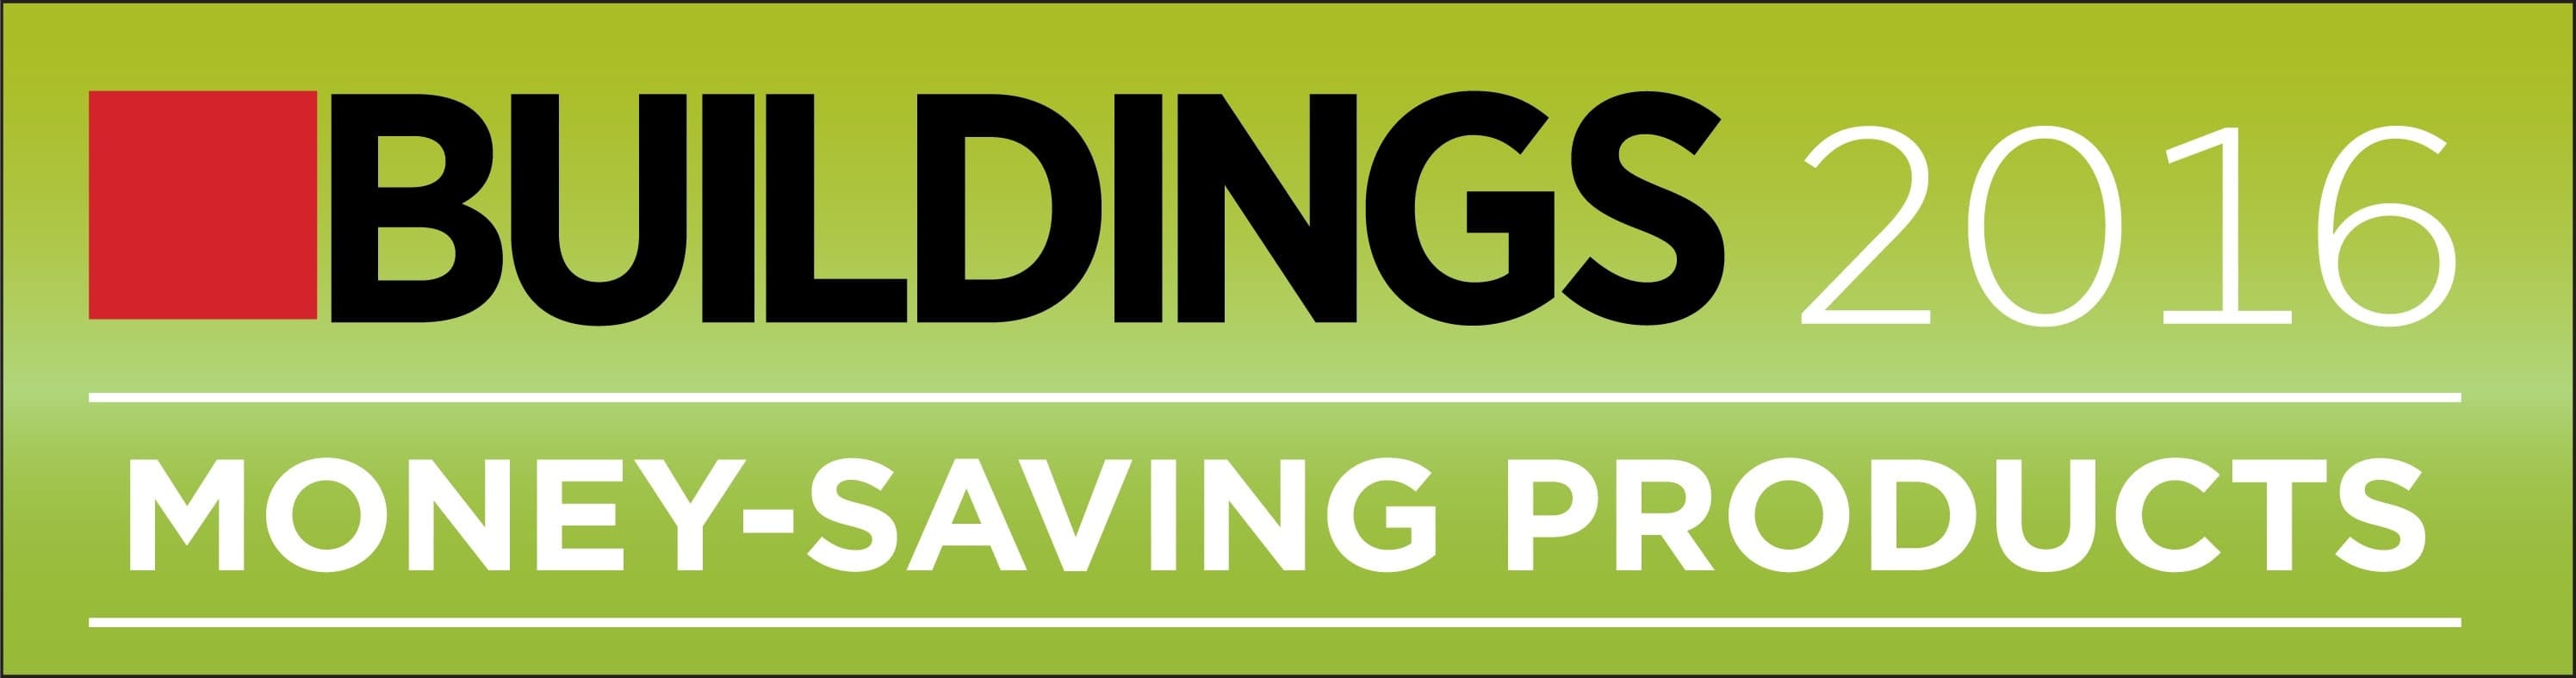 Trim-Tex was selected as a 2016 Money Saving Product winner from Buildings.